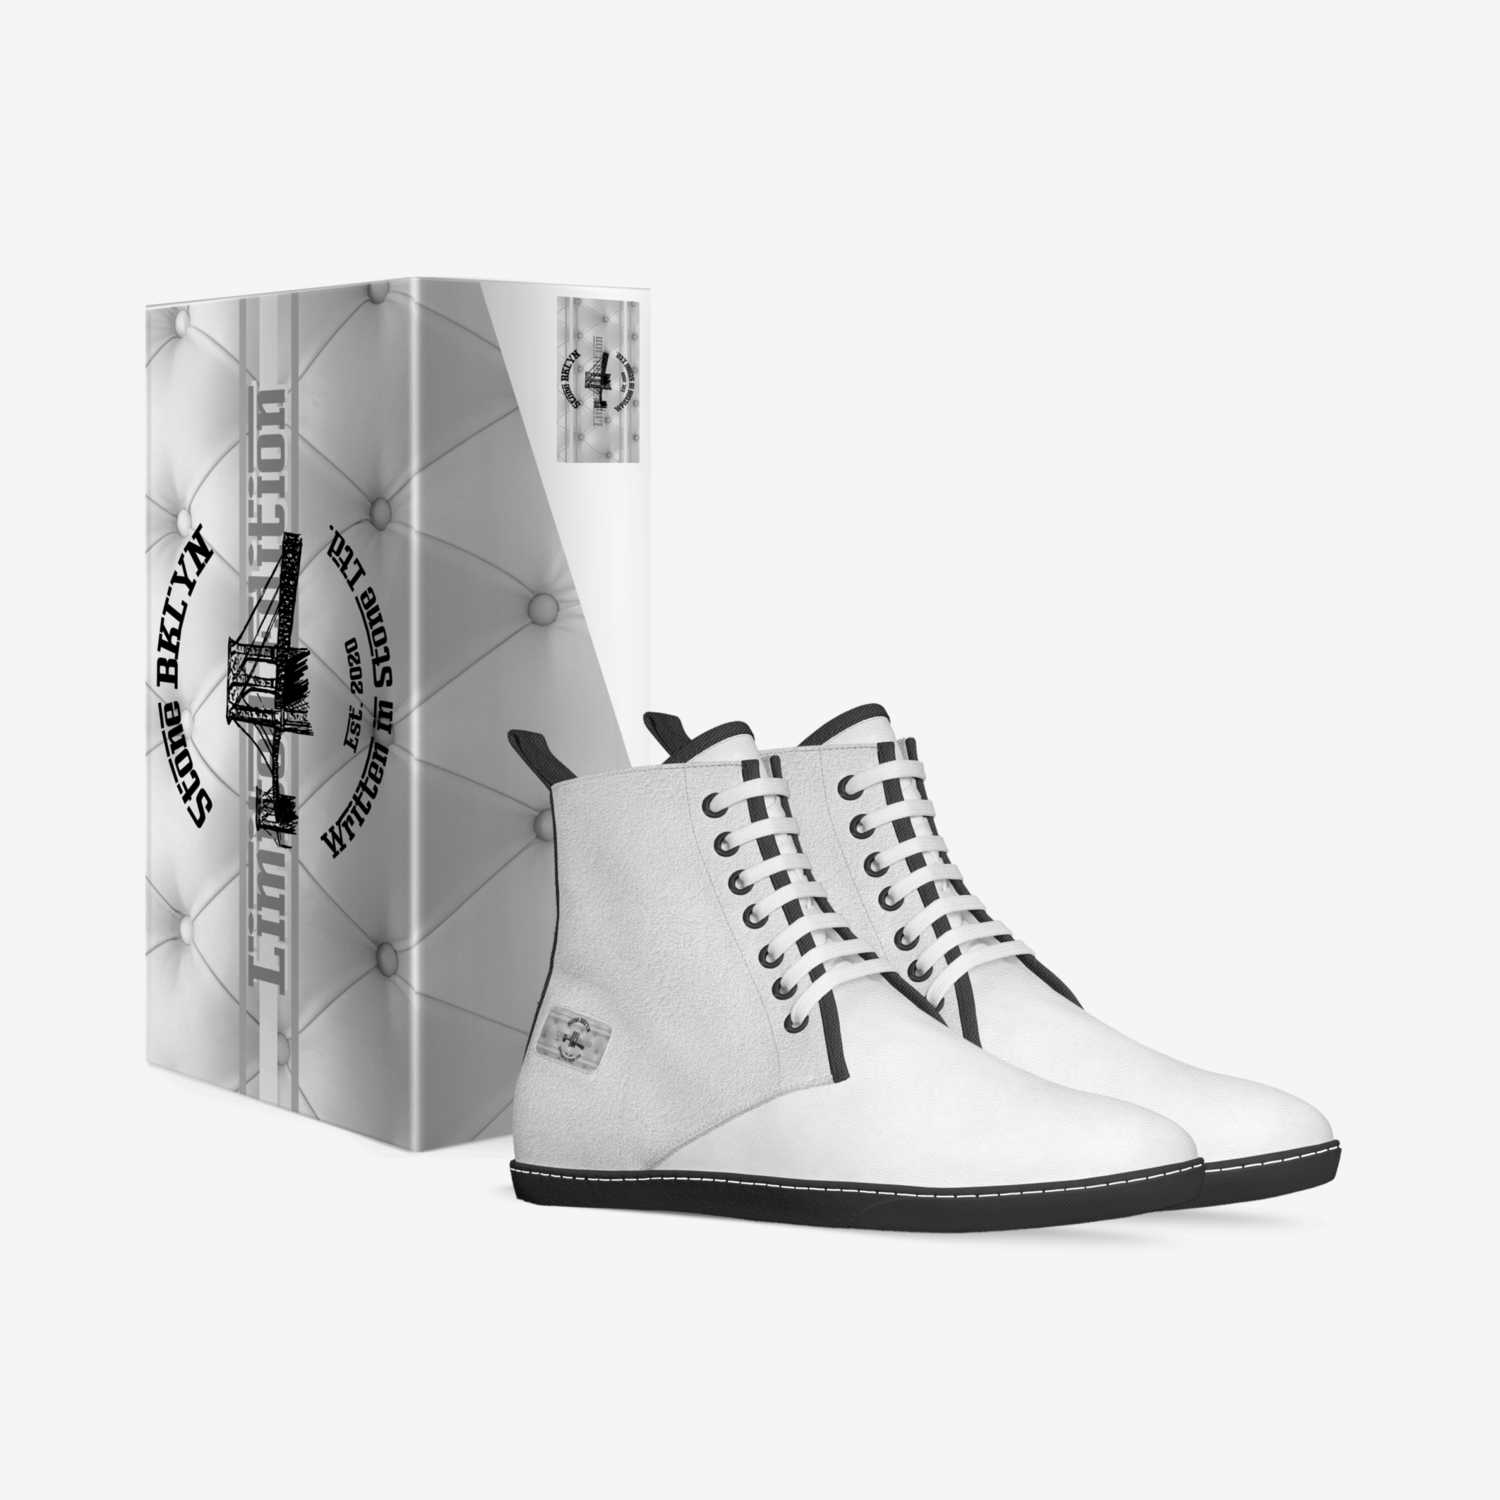 STONE White custom made in Italy shoes by Kevin Marron | Box view